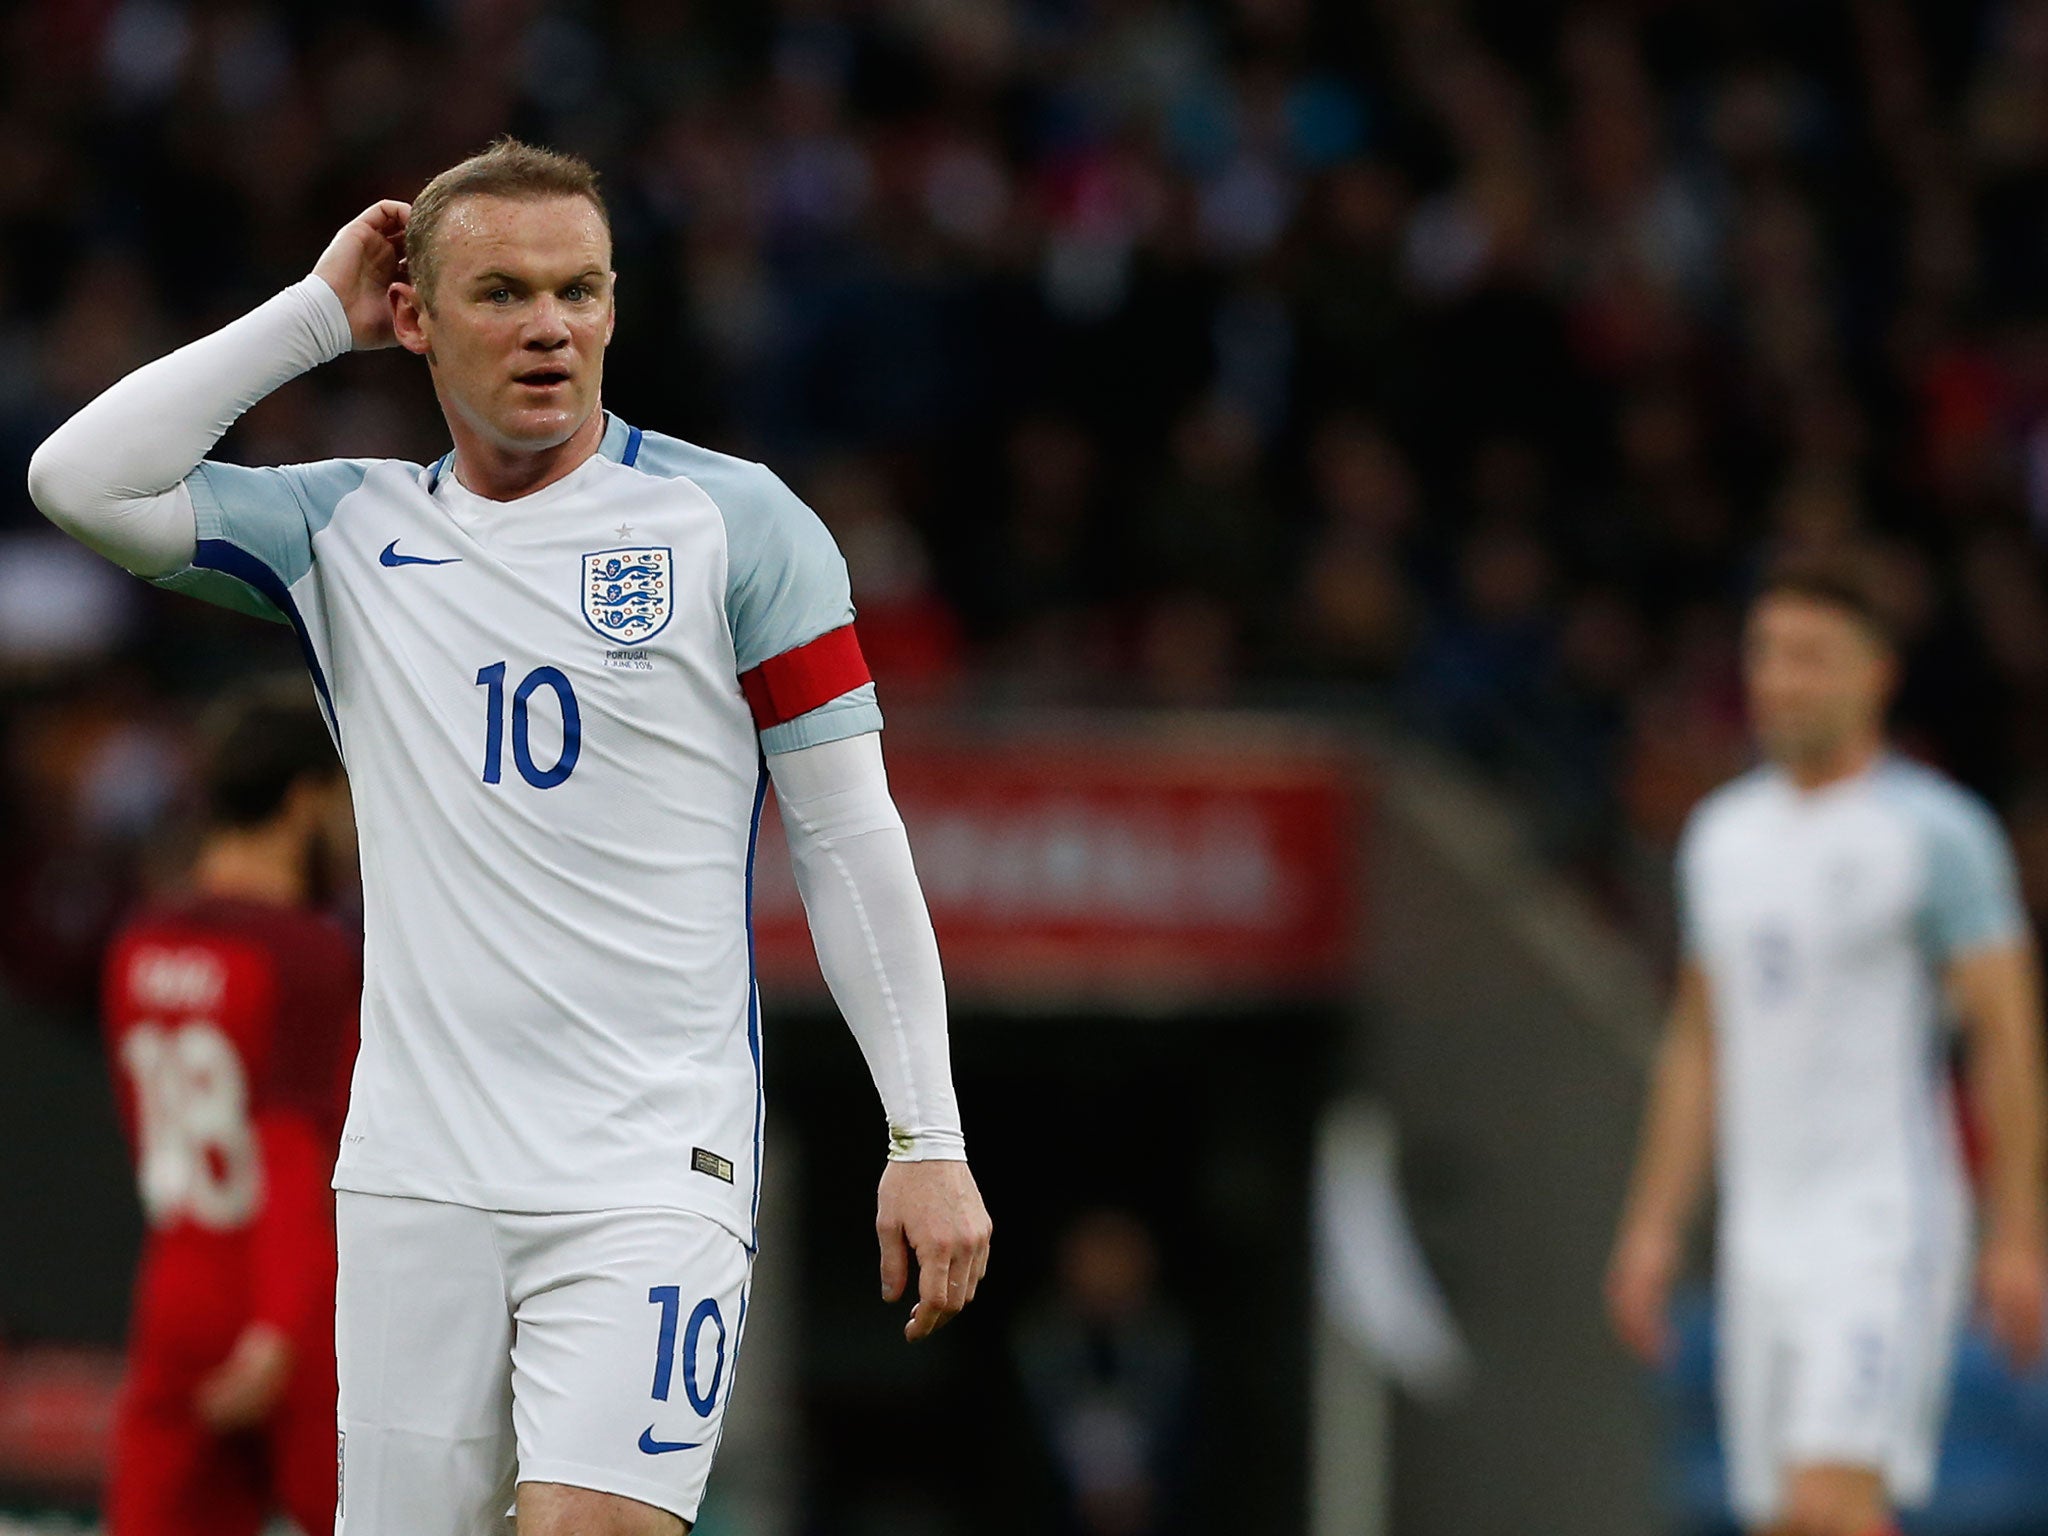 The 31-year-old's England future could now be in jeopardy